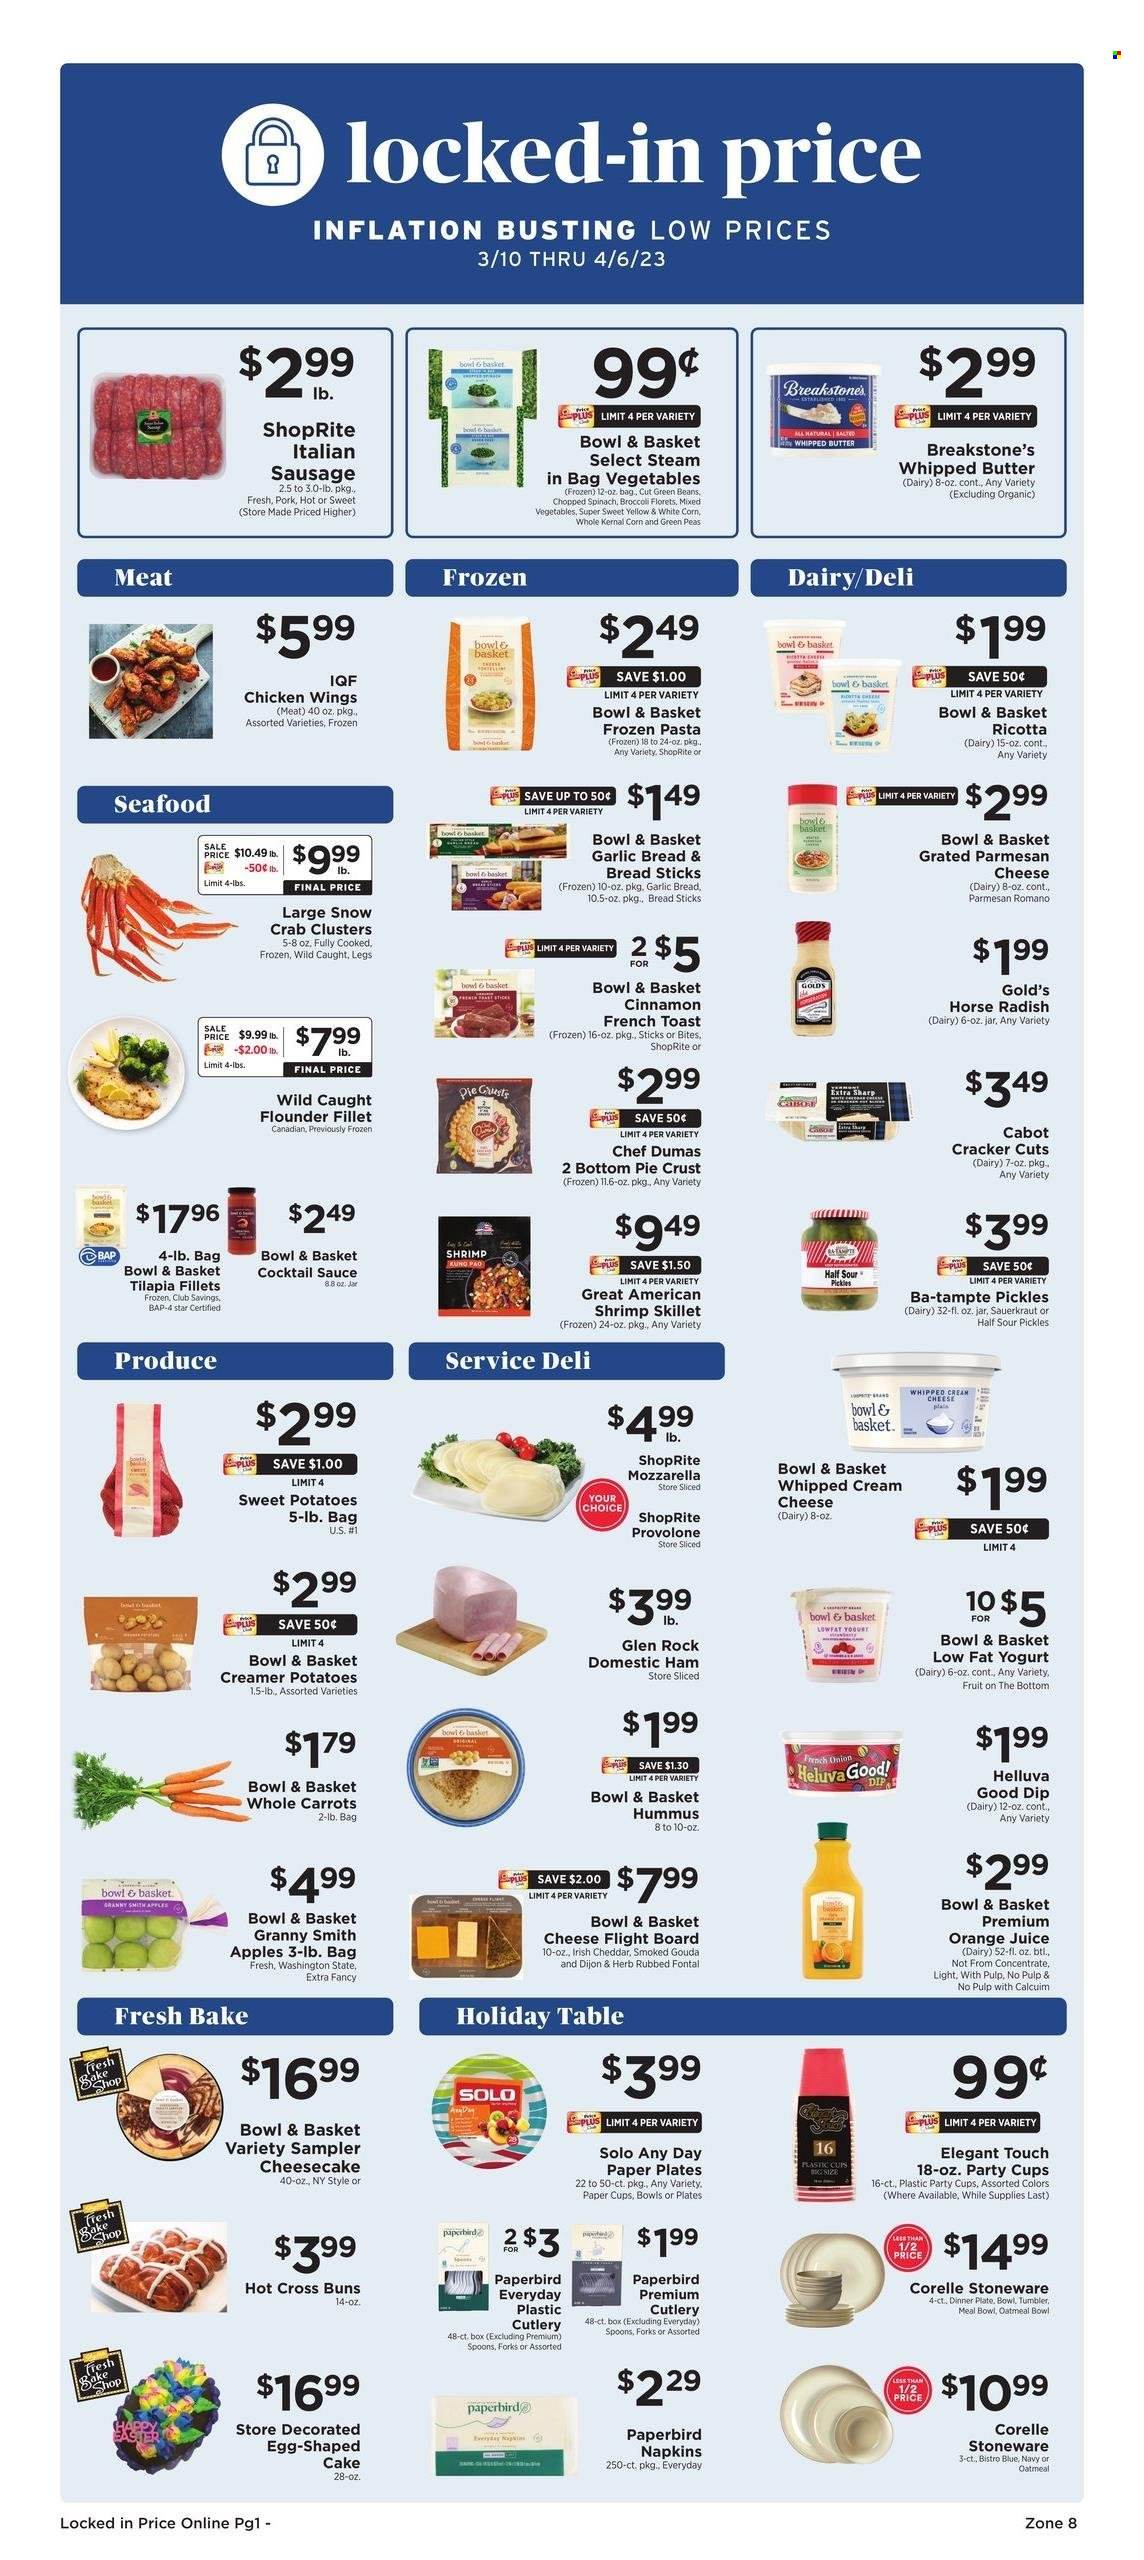 thumbnail - ShopRite Flyer - 03/24/2023 - 03/30/2023 - Sales products - cake, buns, Bowl & Basket, cheesecake, broccoli, carrots, corn, green beans, radishes, sweet potato, potatoes, peas, onion, apples, Granny Smith, flounder, tilapia, seafood, crab, shrimps, sauce, ham, sausage, italian sausage, hummus, cream cheese, gouda, mozzarella, ricotta, cheddar, parmesan, cheese, Provolone, yoghurt, eggs, whipped butter, whipped cream, dip, mixed vegetables, chicken wings, crackers, bread sticks, pie crust, oatmeal, sauerkraut, pickles, cinnamon, cocktail sauce, orange juice, juice, chicken, napkins, spoon, tumbler, plate, cup, disposable cutlery, dinner plate, stoneware, paper, paper plate, party cups. Page 14.